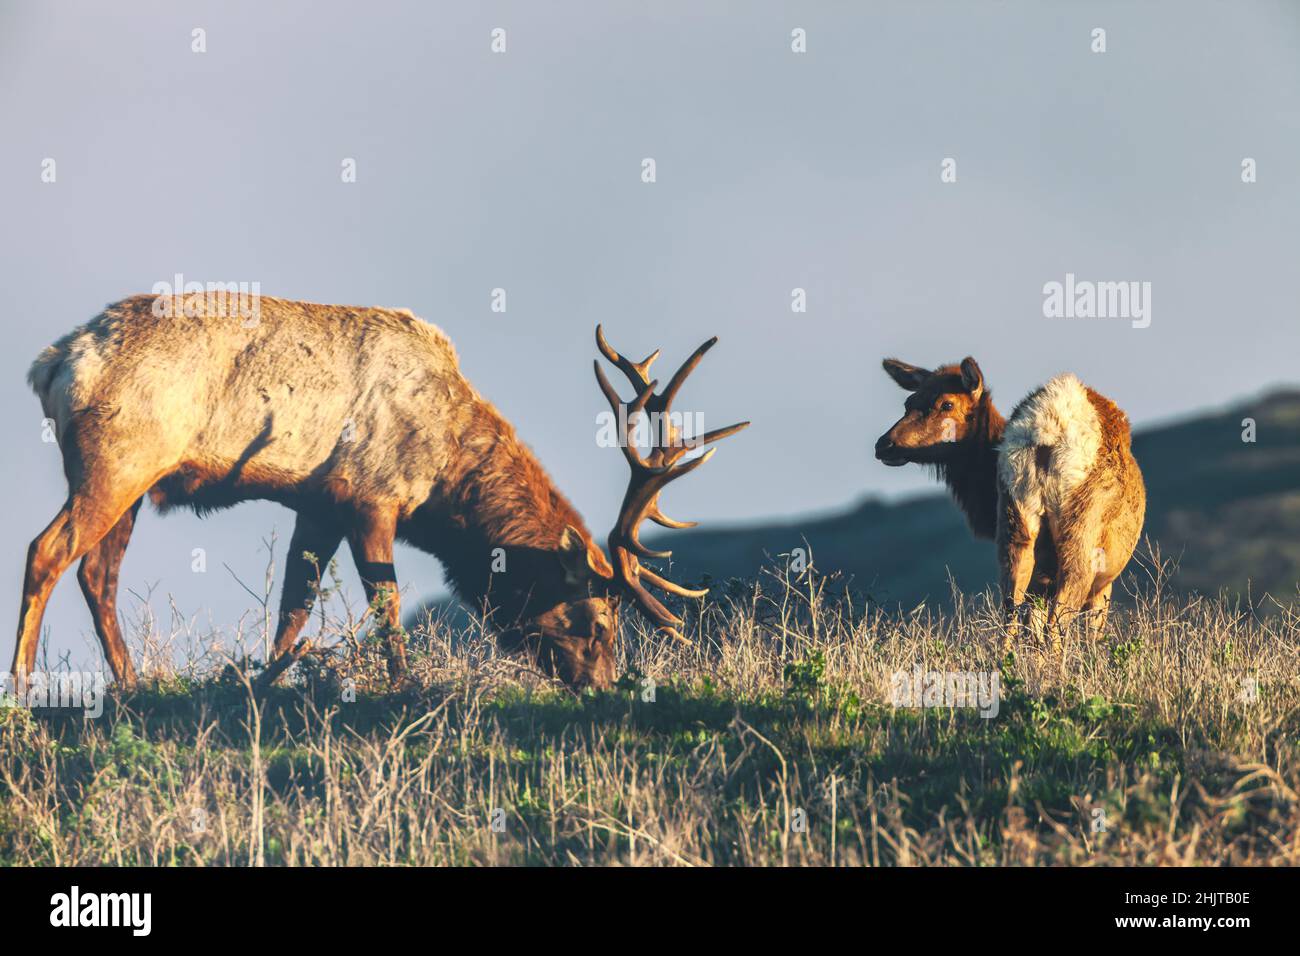 A male tule elk is feeding on the grass as a female elk looks on, Point Reyes National Seashore, California, USA. Stock Photo